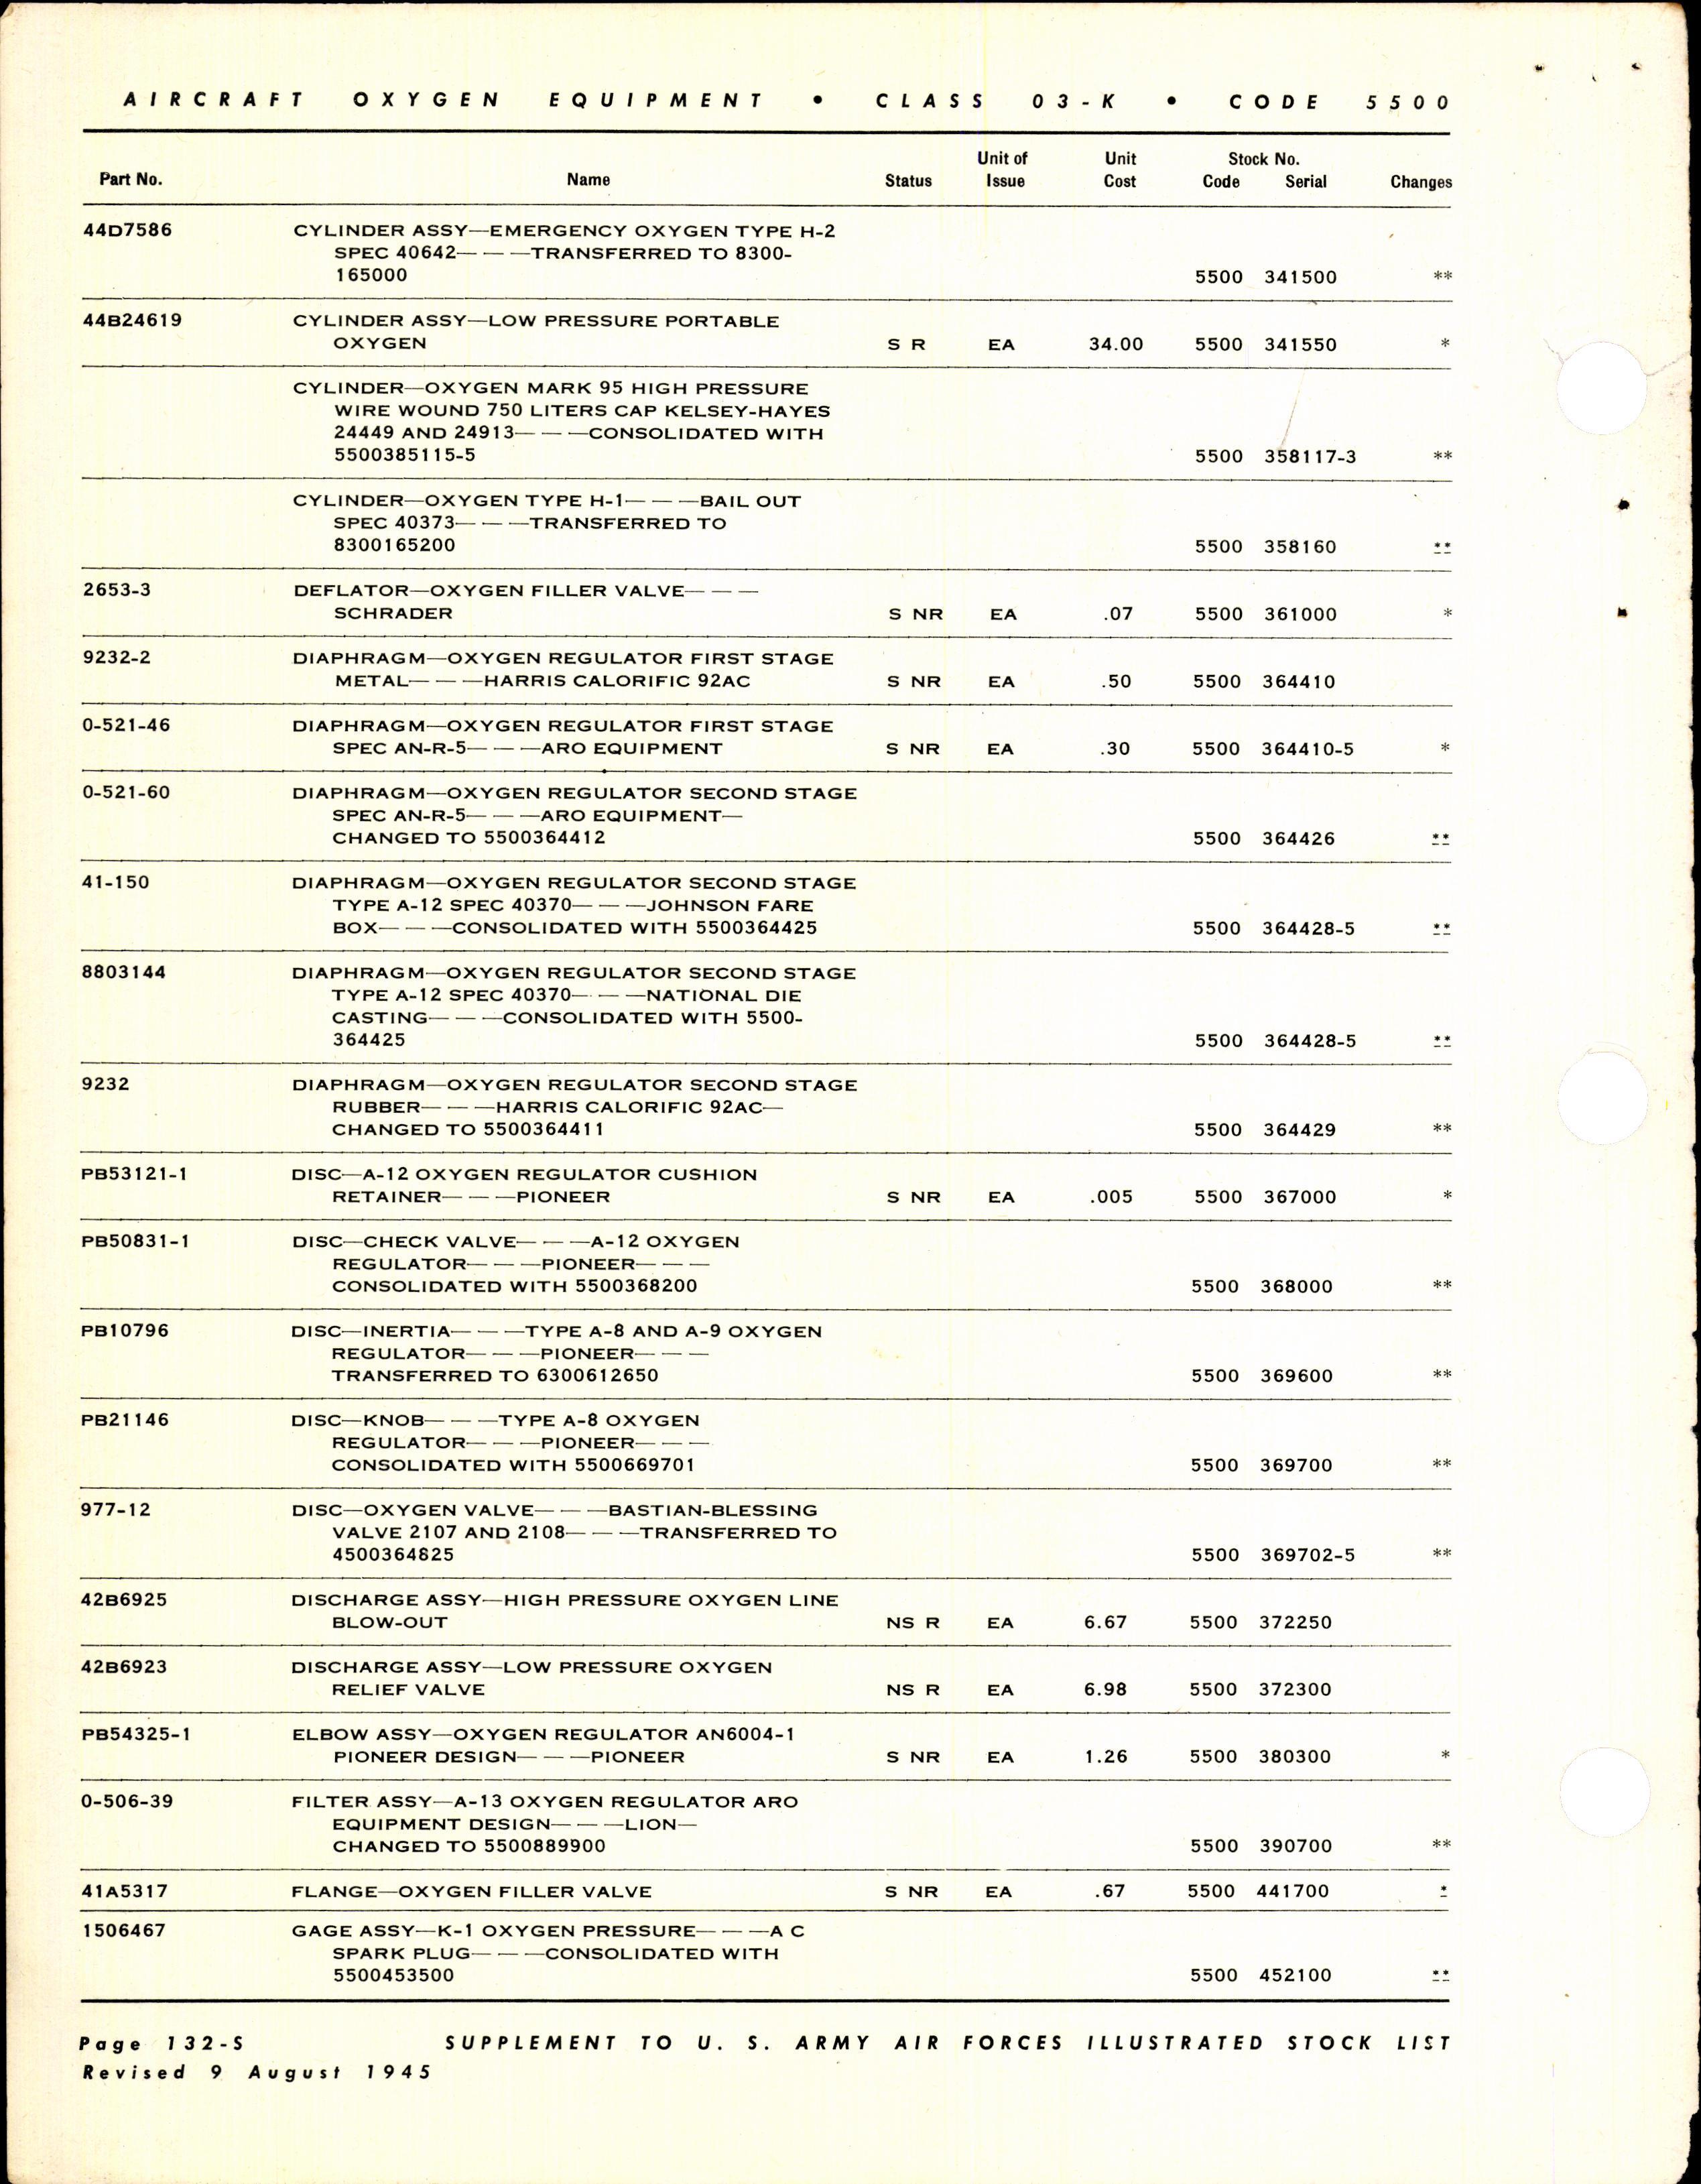 Sample page 10 from AirCorps Library document: Illustrated Stock List for Aircraft Oxygen Equipment